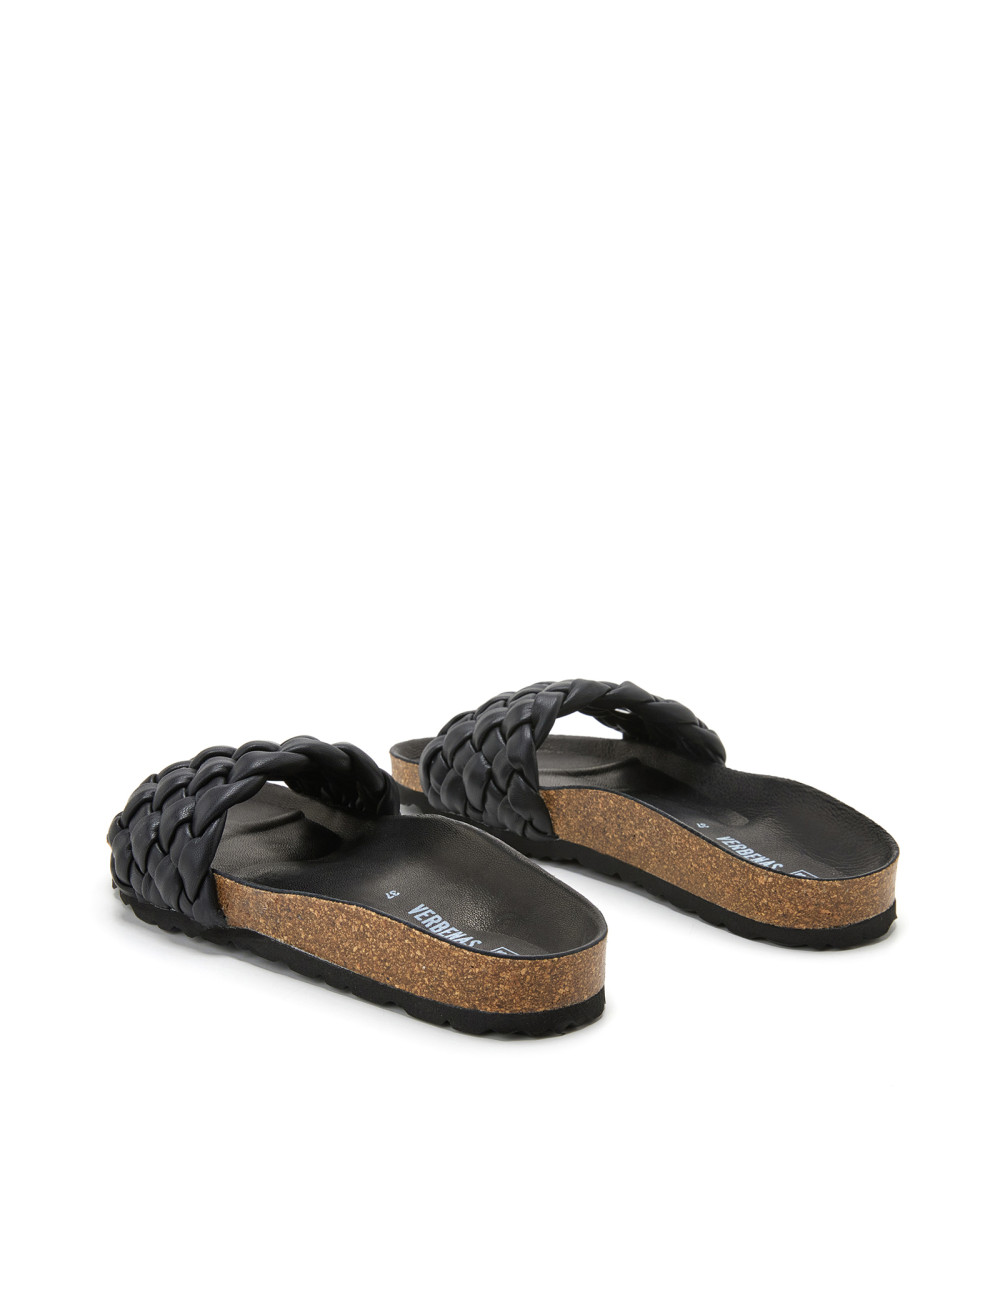 Paragon Eeken ESDG1003 Men Stylish Sandals | Comfortable Sandals for Daily  Outdoor Use | Casual Formal Sandals with Cushioned Soles - Price History